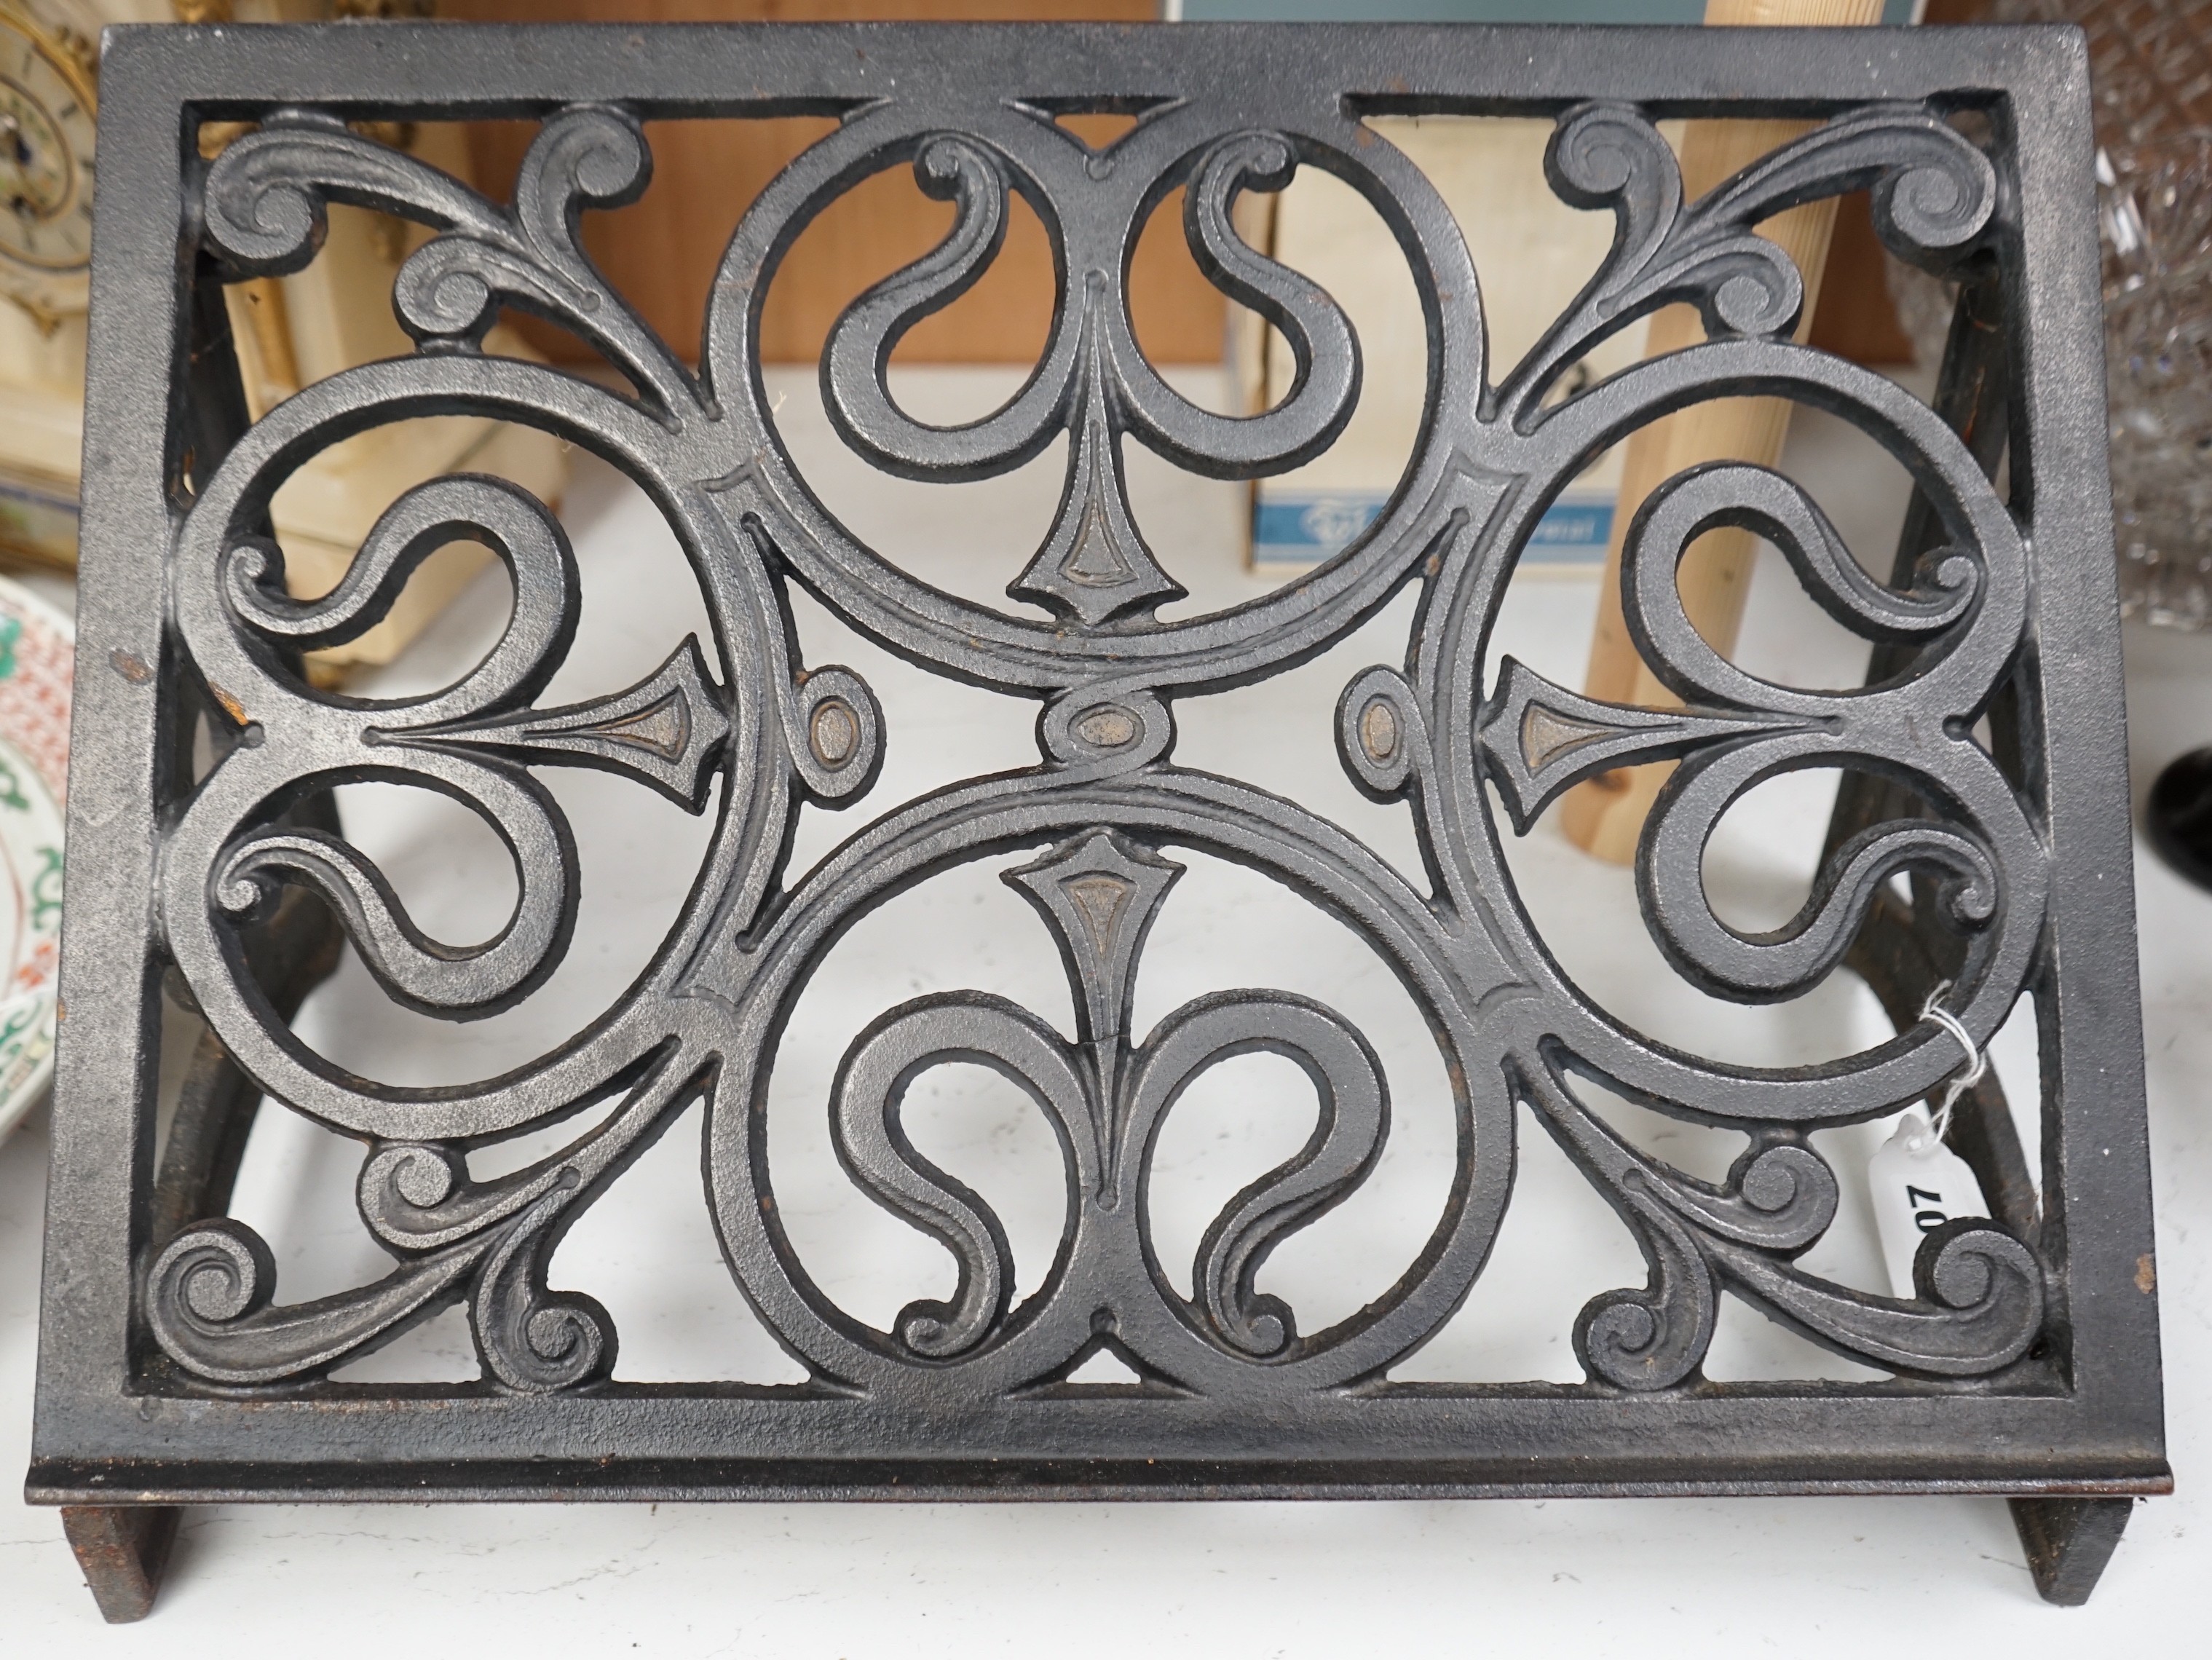 An ornate cast iron single lecturn, 47cms wide x 28cms high